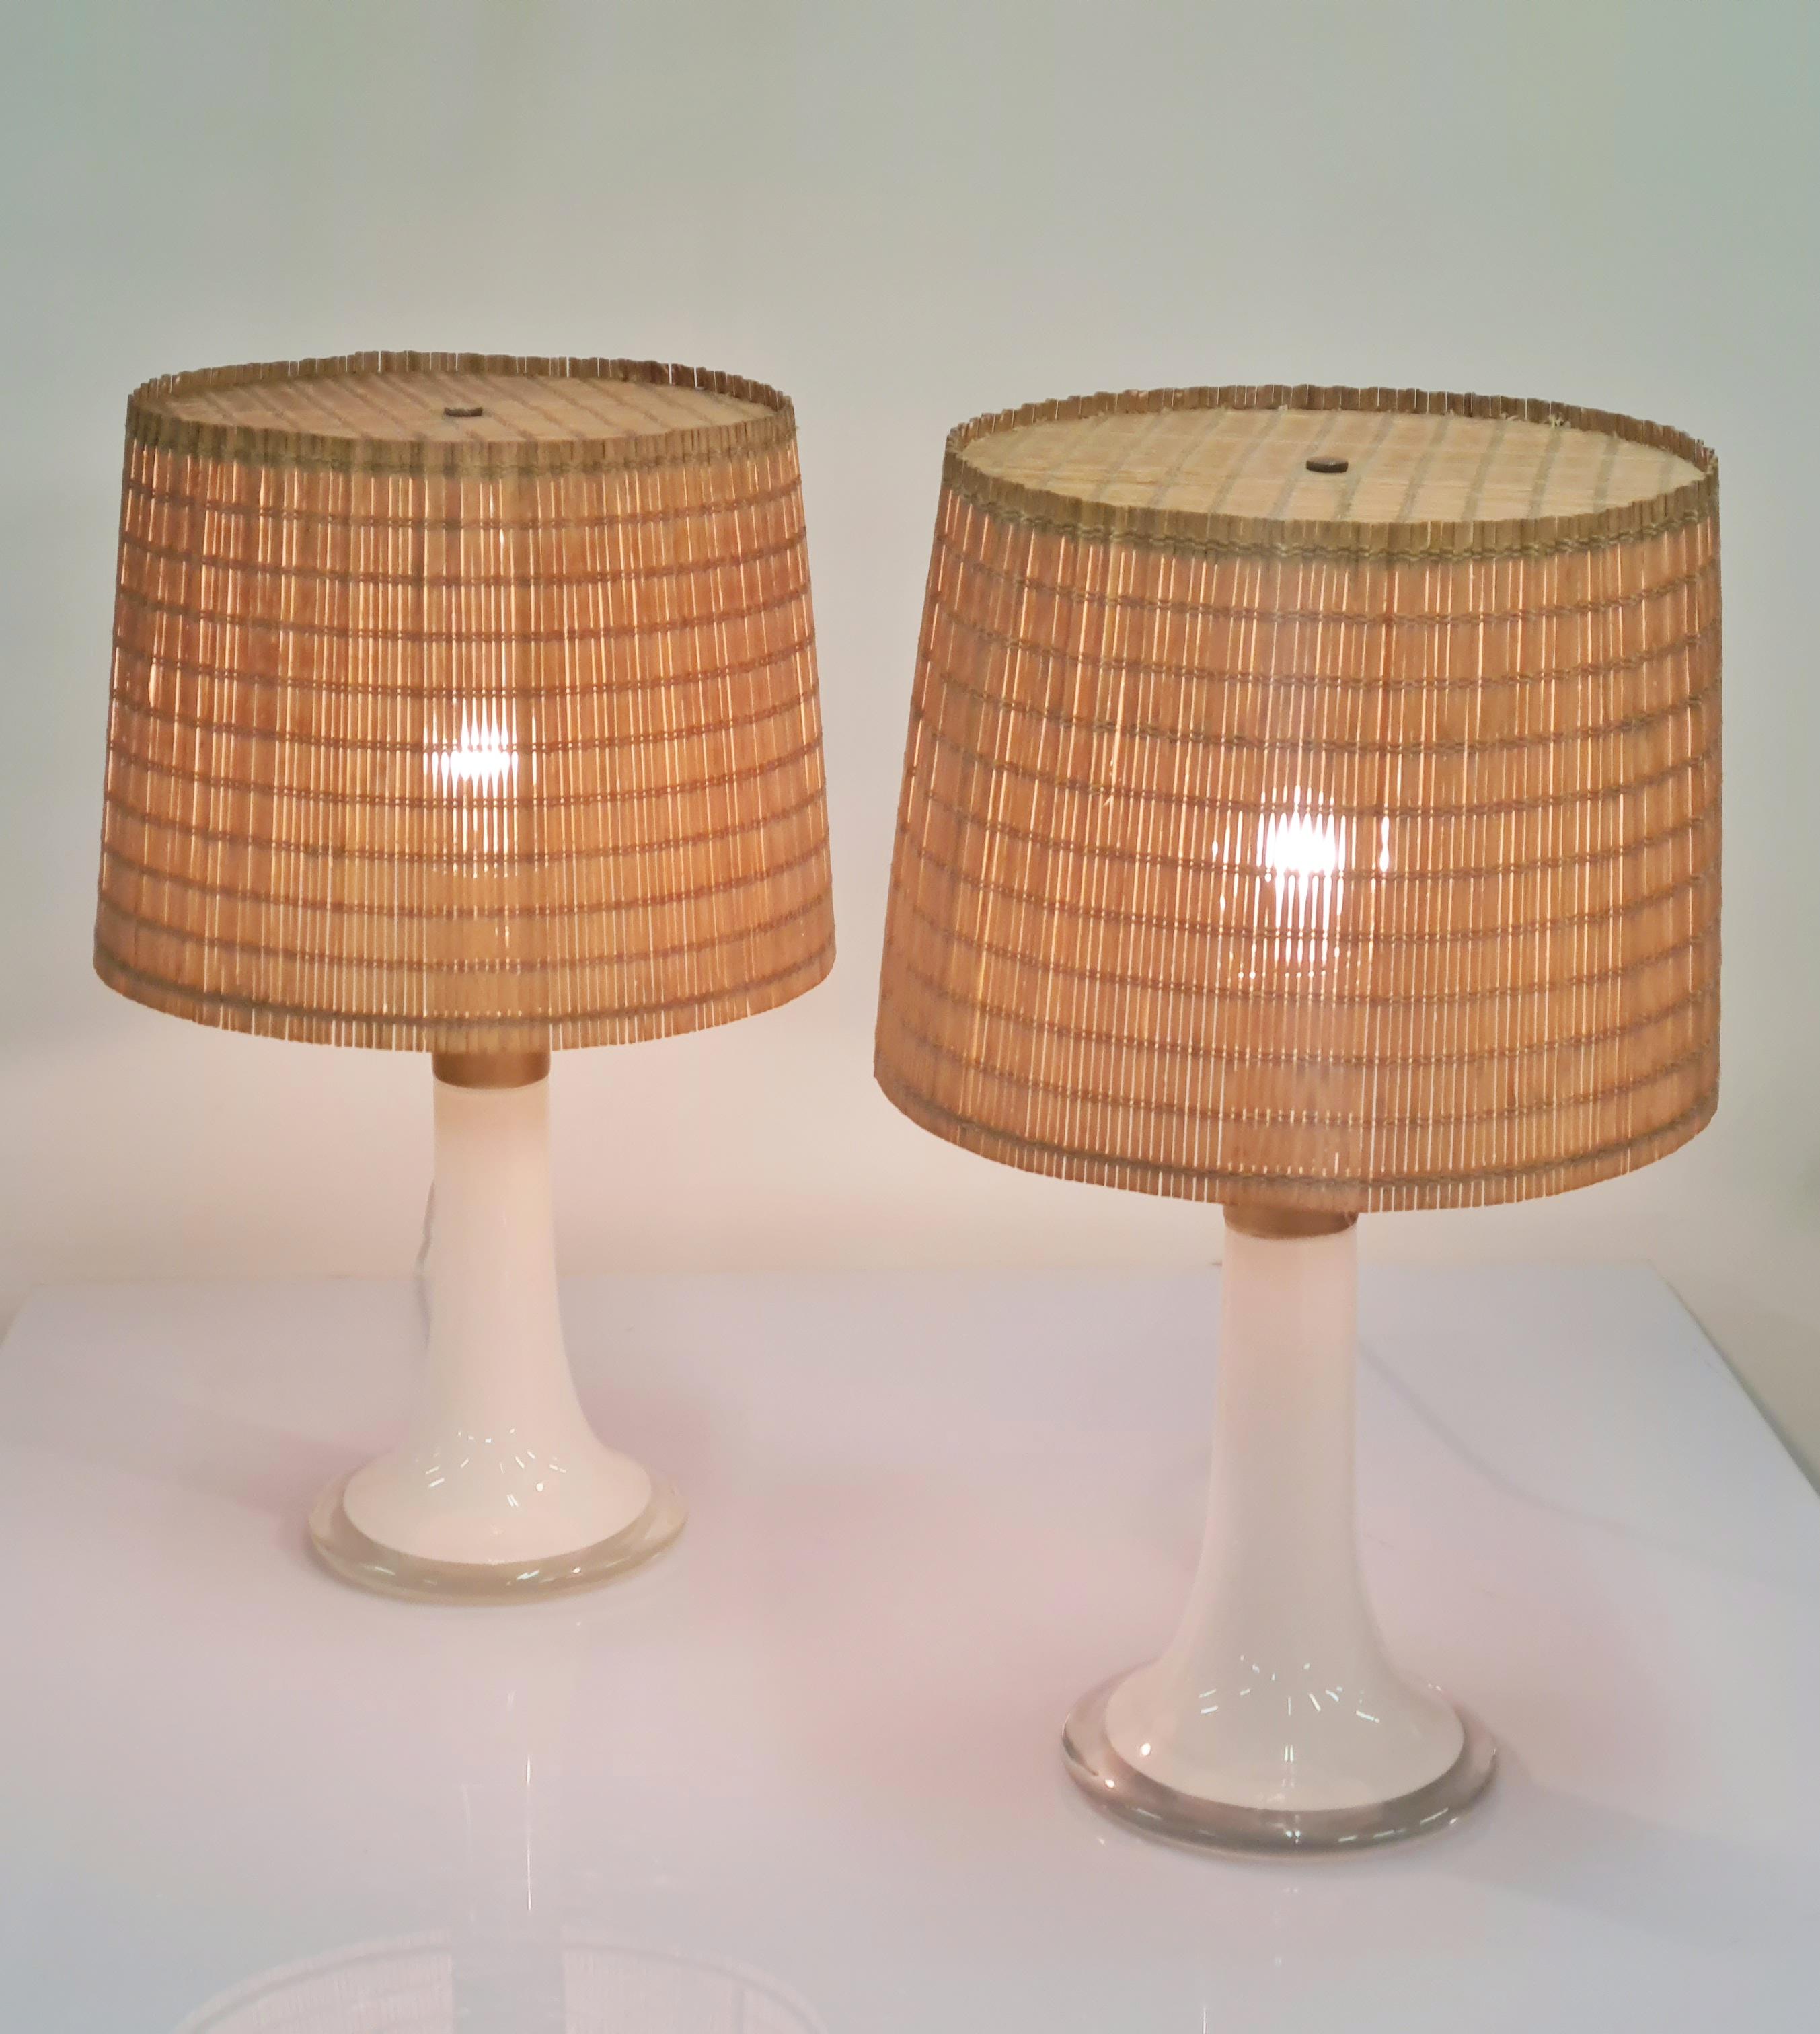 Lisa Johansson Pape Pair of Table Lamps Model 46-017, Orno 1960s For Sale 4